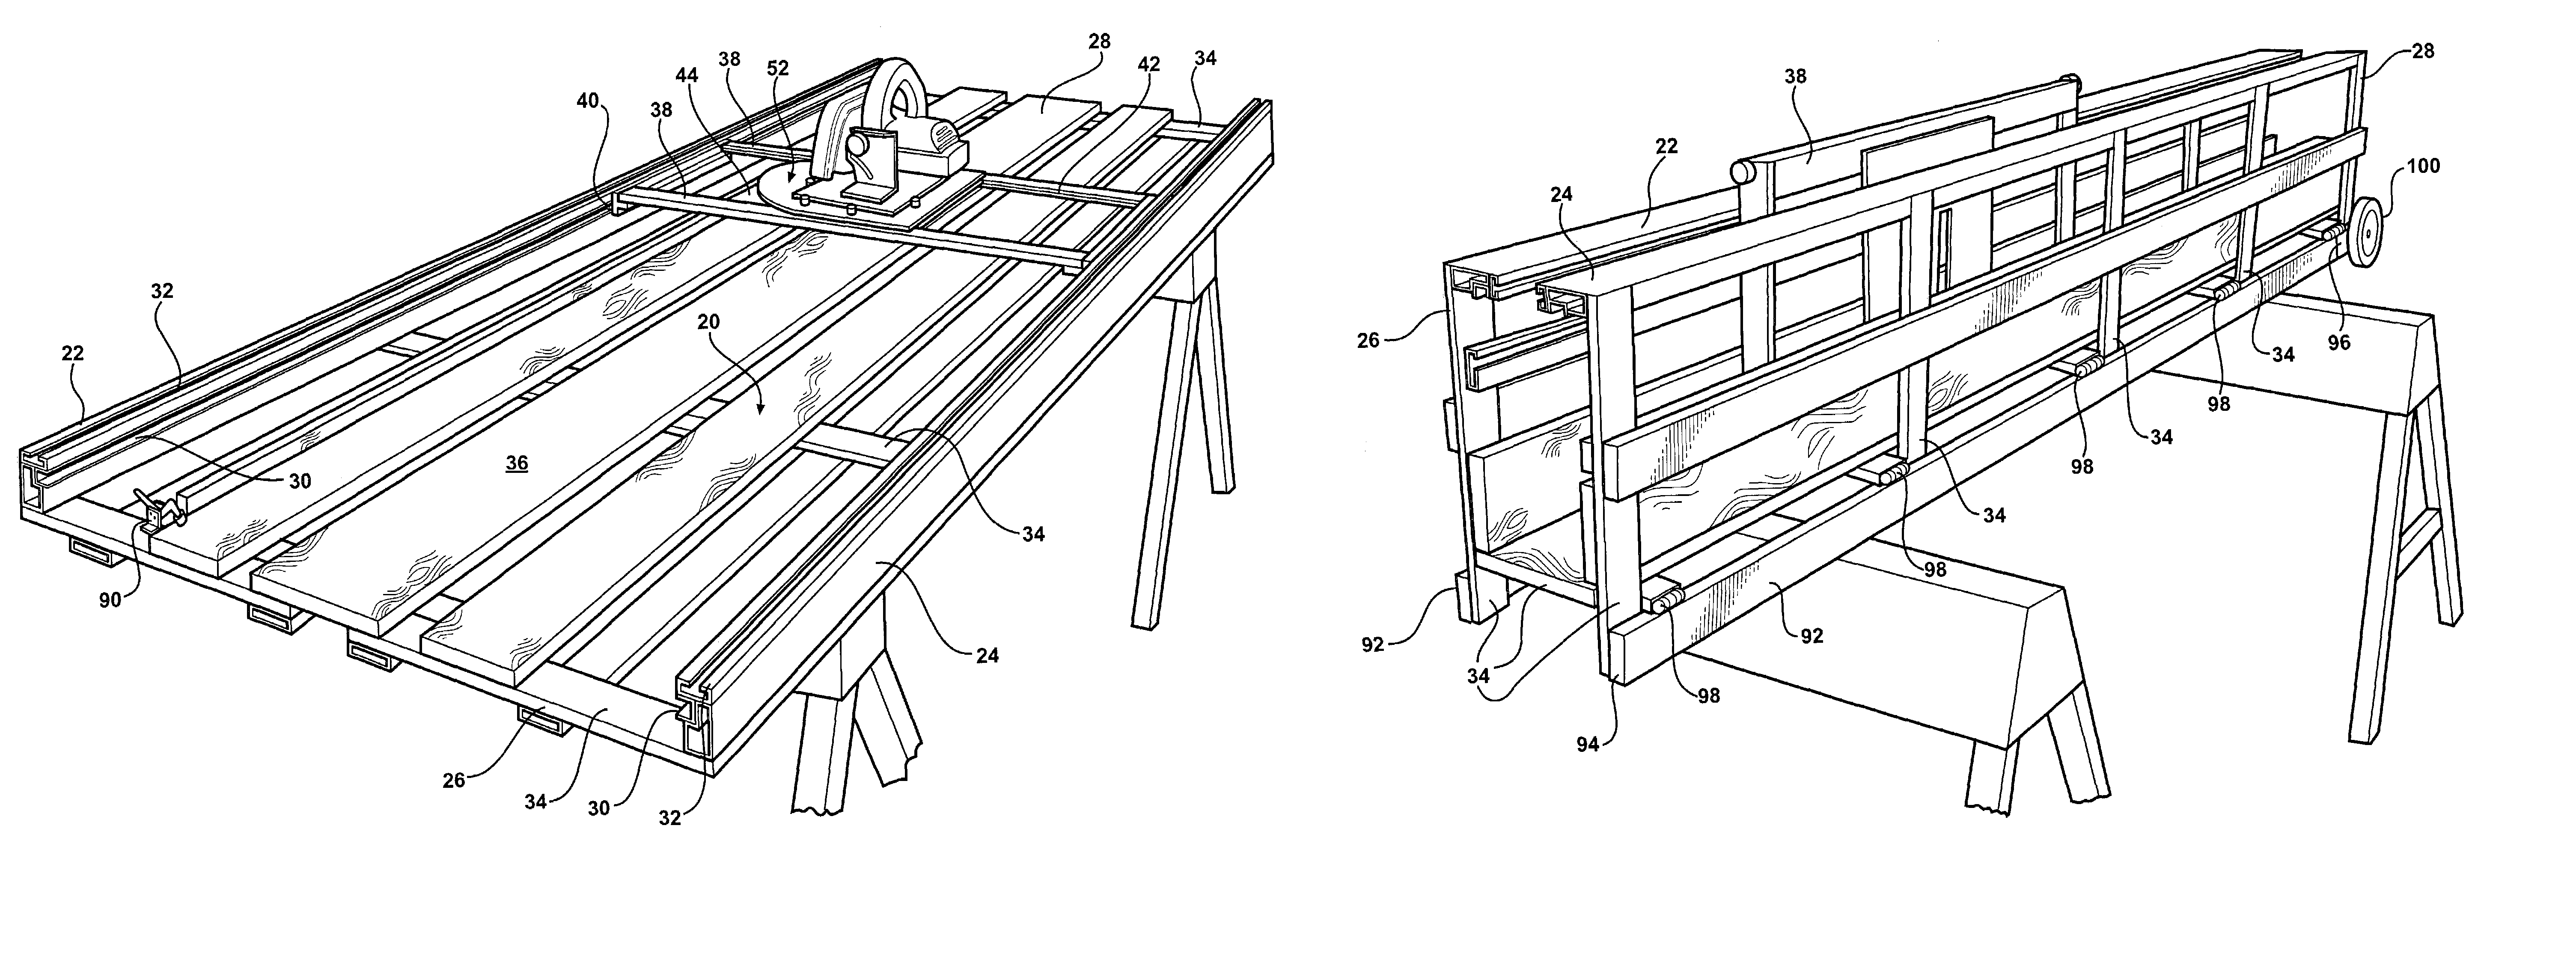 Portable saw table assembly